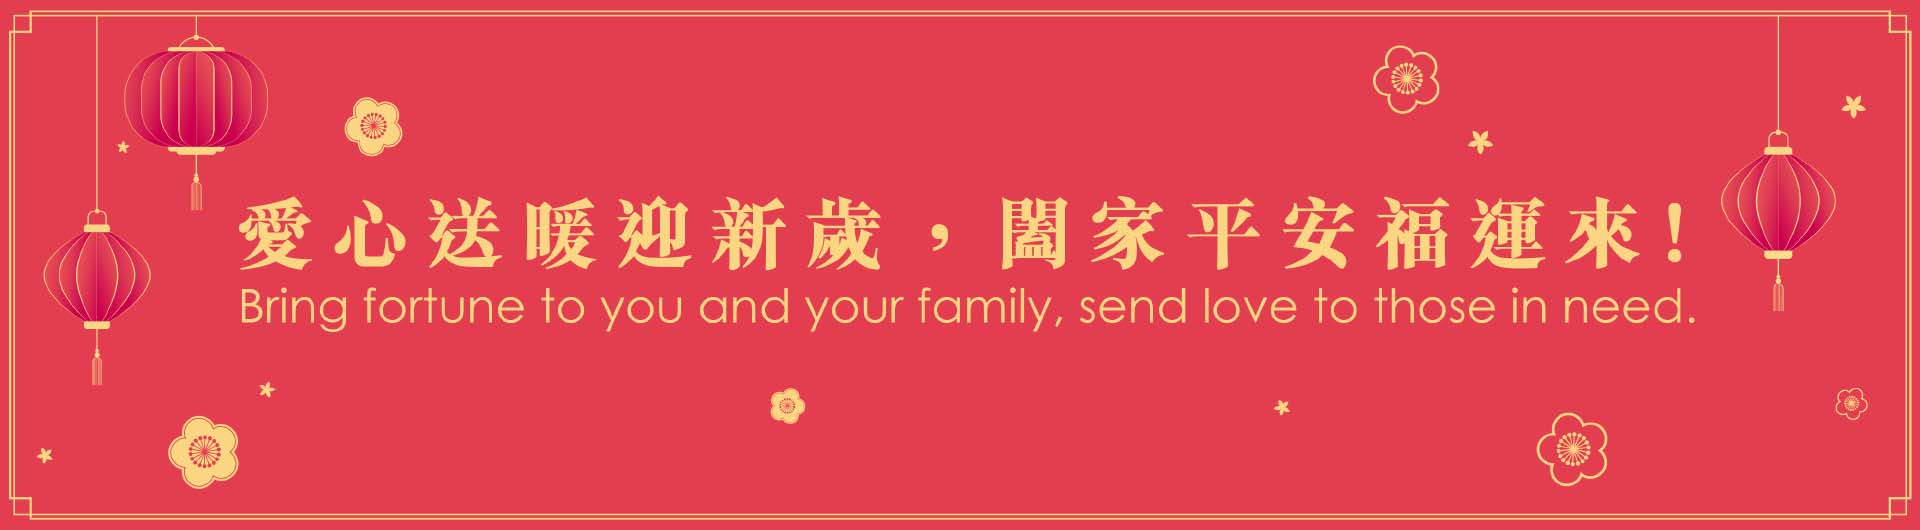 cny appeal